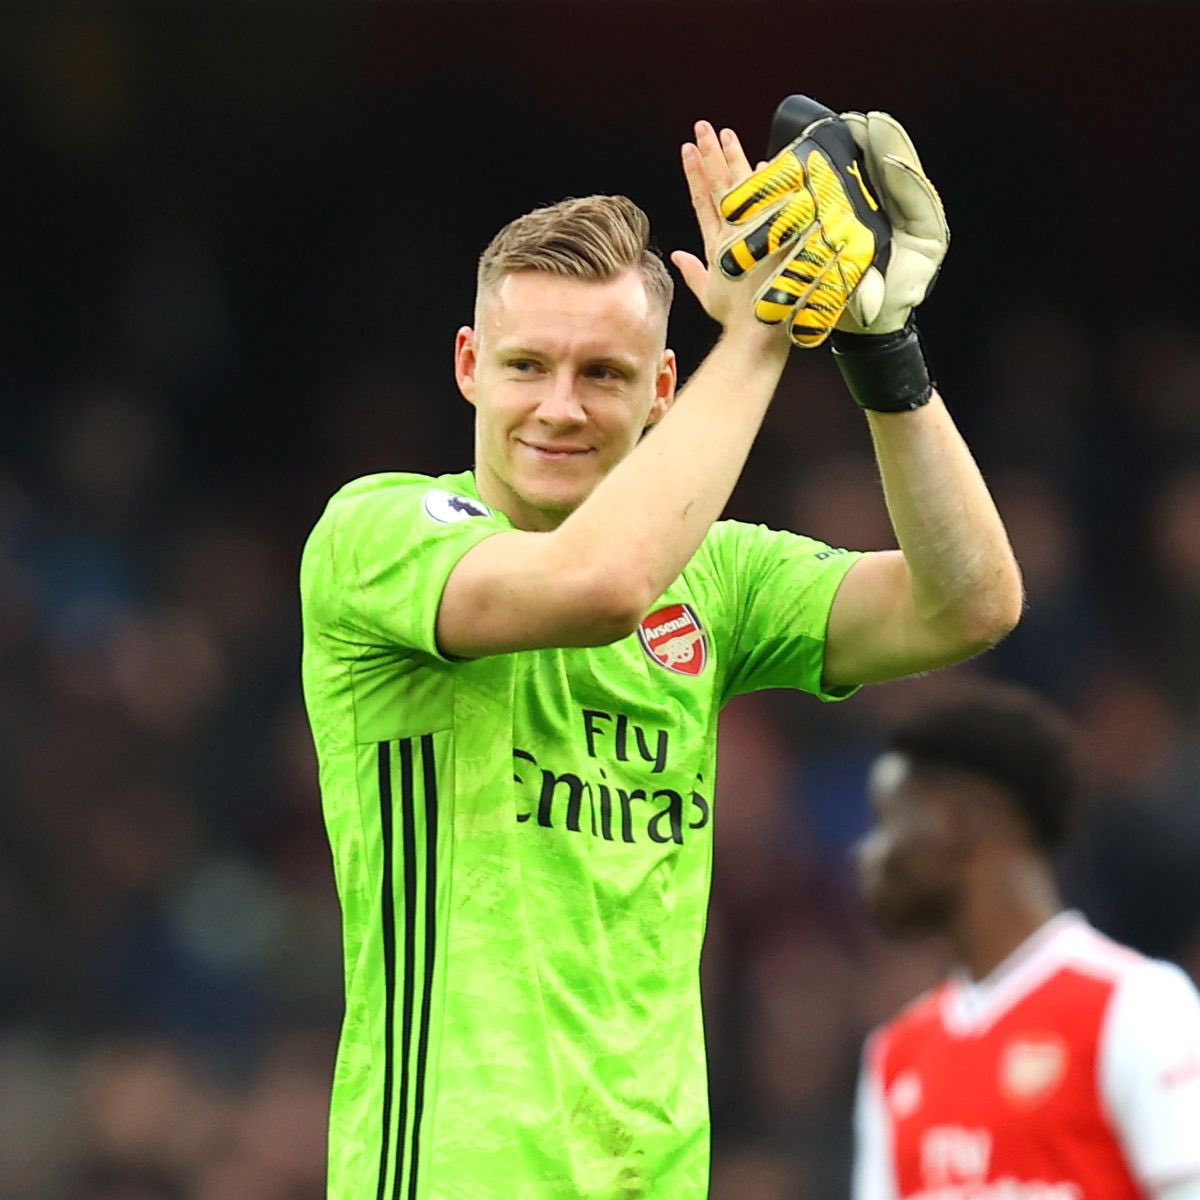 Leno is one of the must underrated goalkeepers in Europe. He has arguably been out most consistent player for a while now and because he doesn’t play for Liverpool or Manchester United, no one notices. Very good goalkeeper and happy to have him as our number 1.